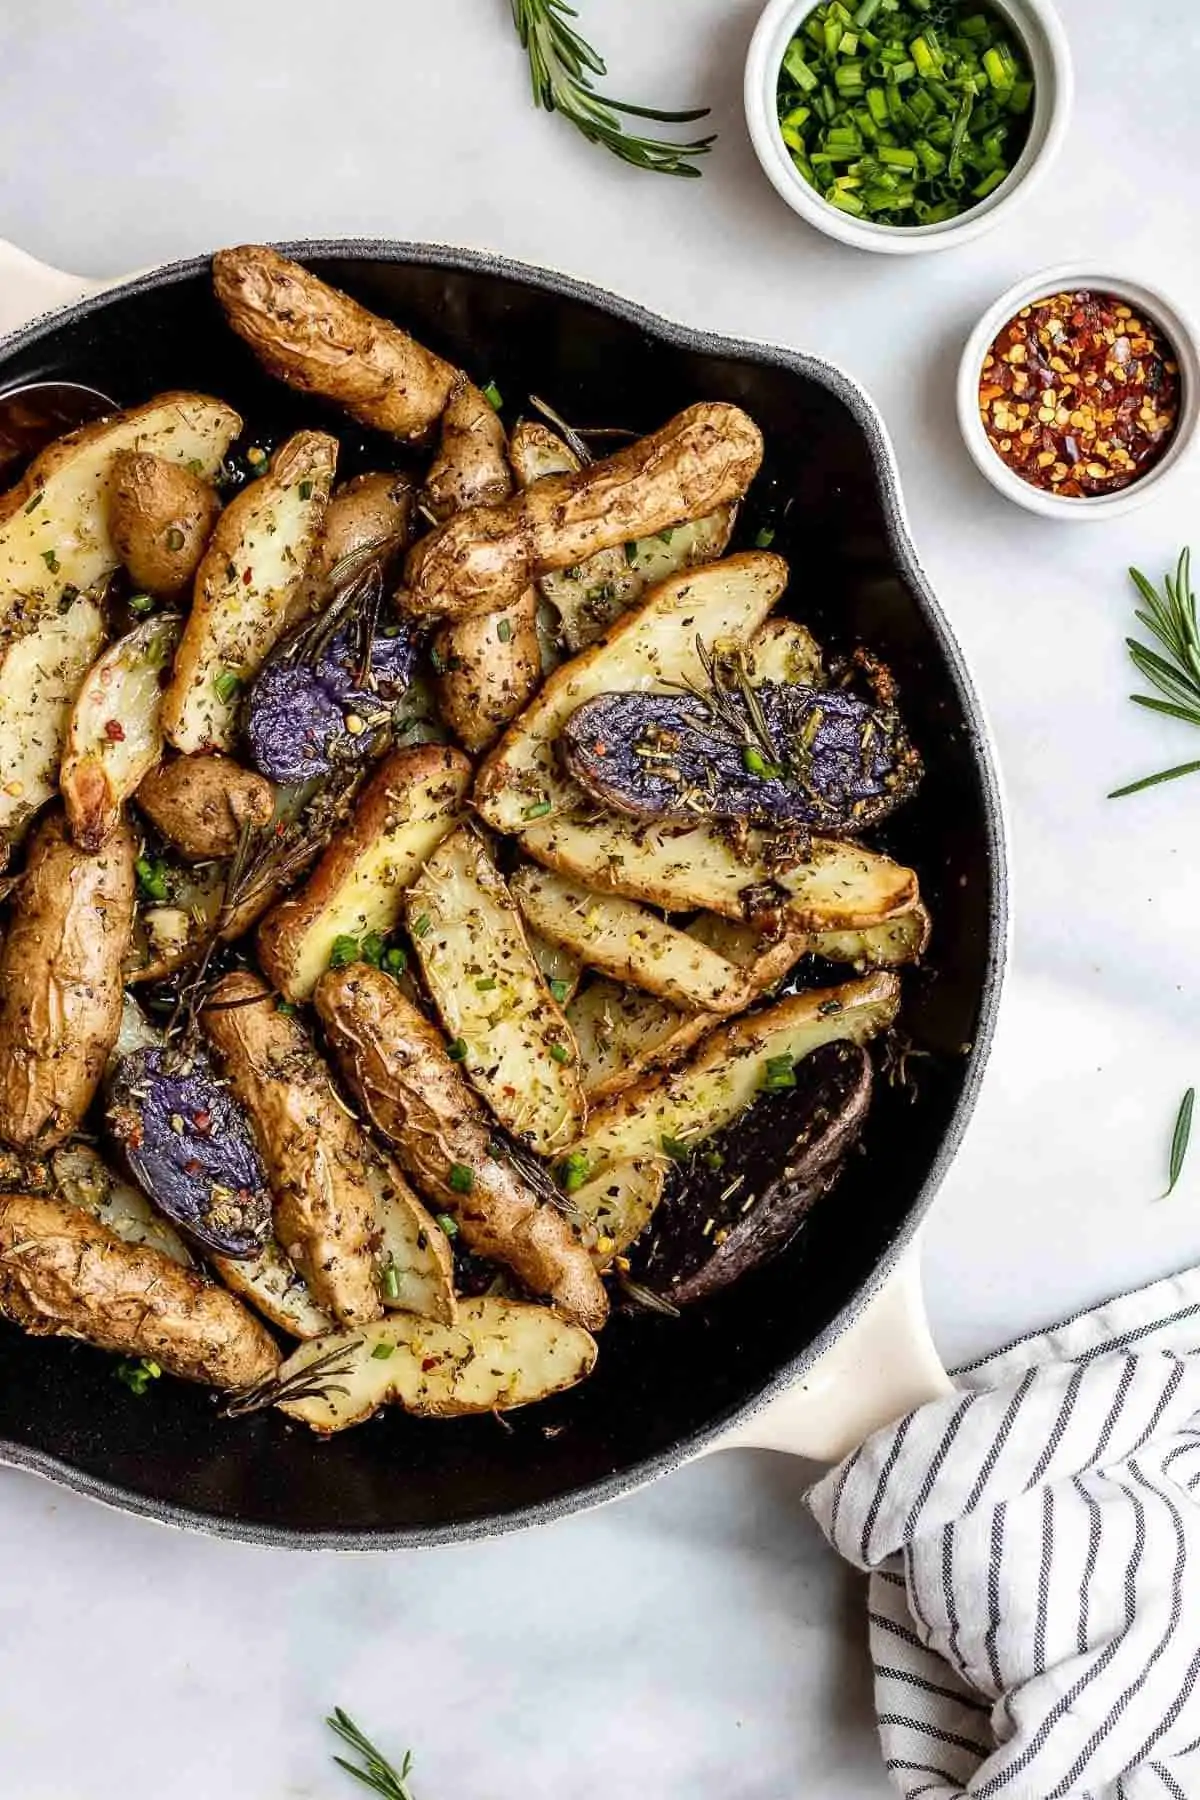 Roasted fingerling potatoes in a cast iron skillet with a towel on the handle.